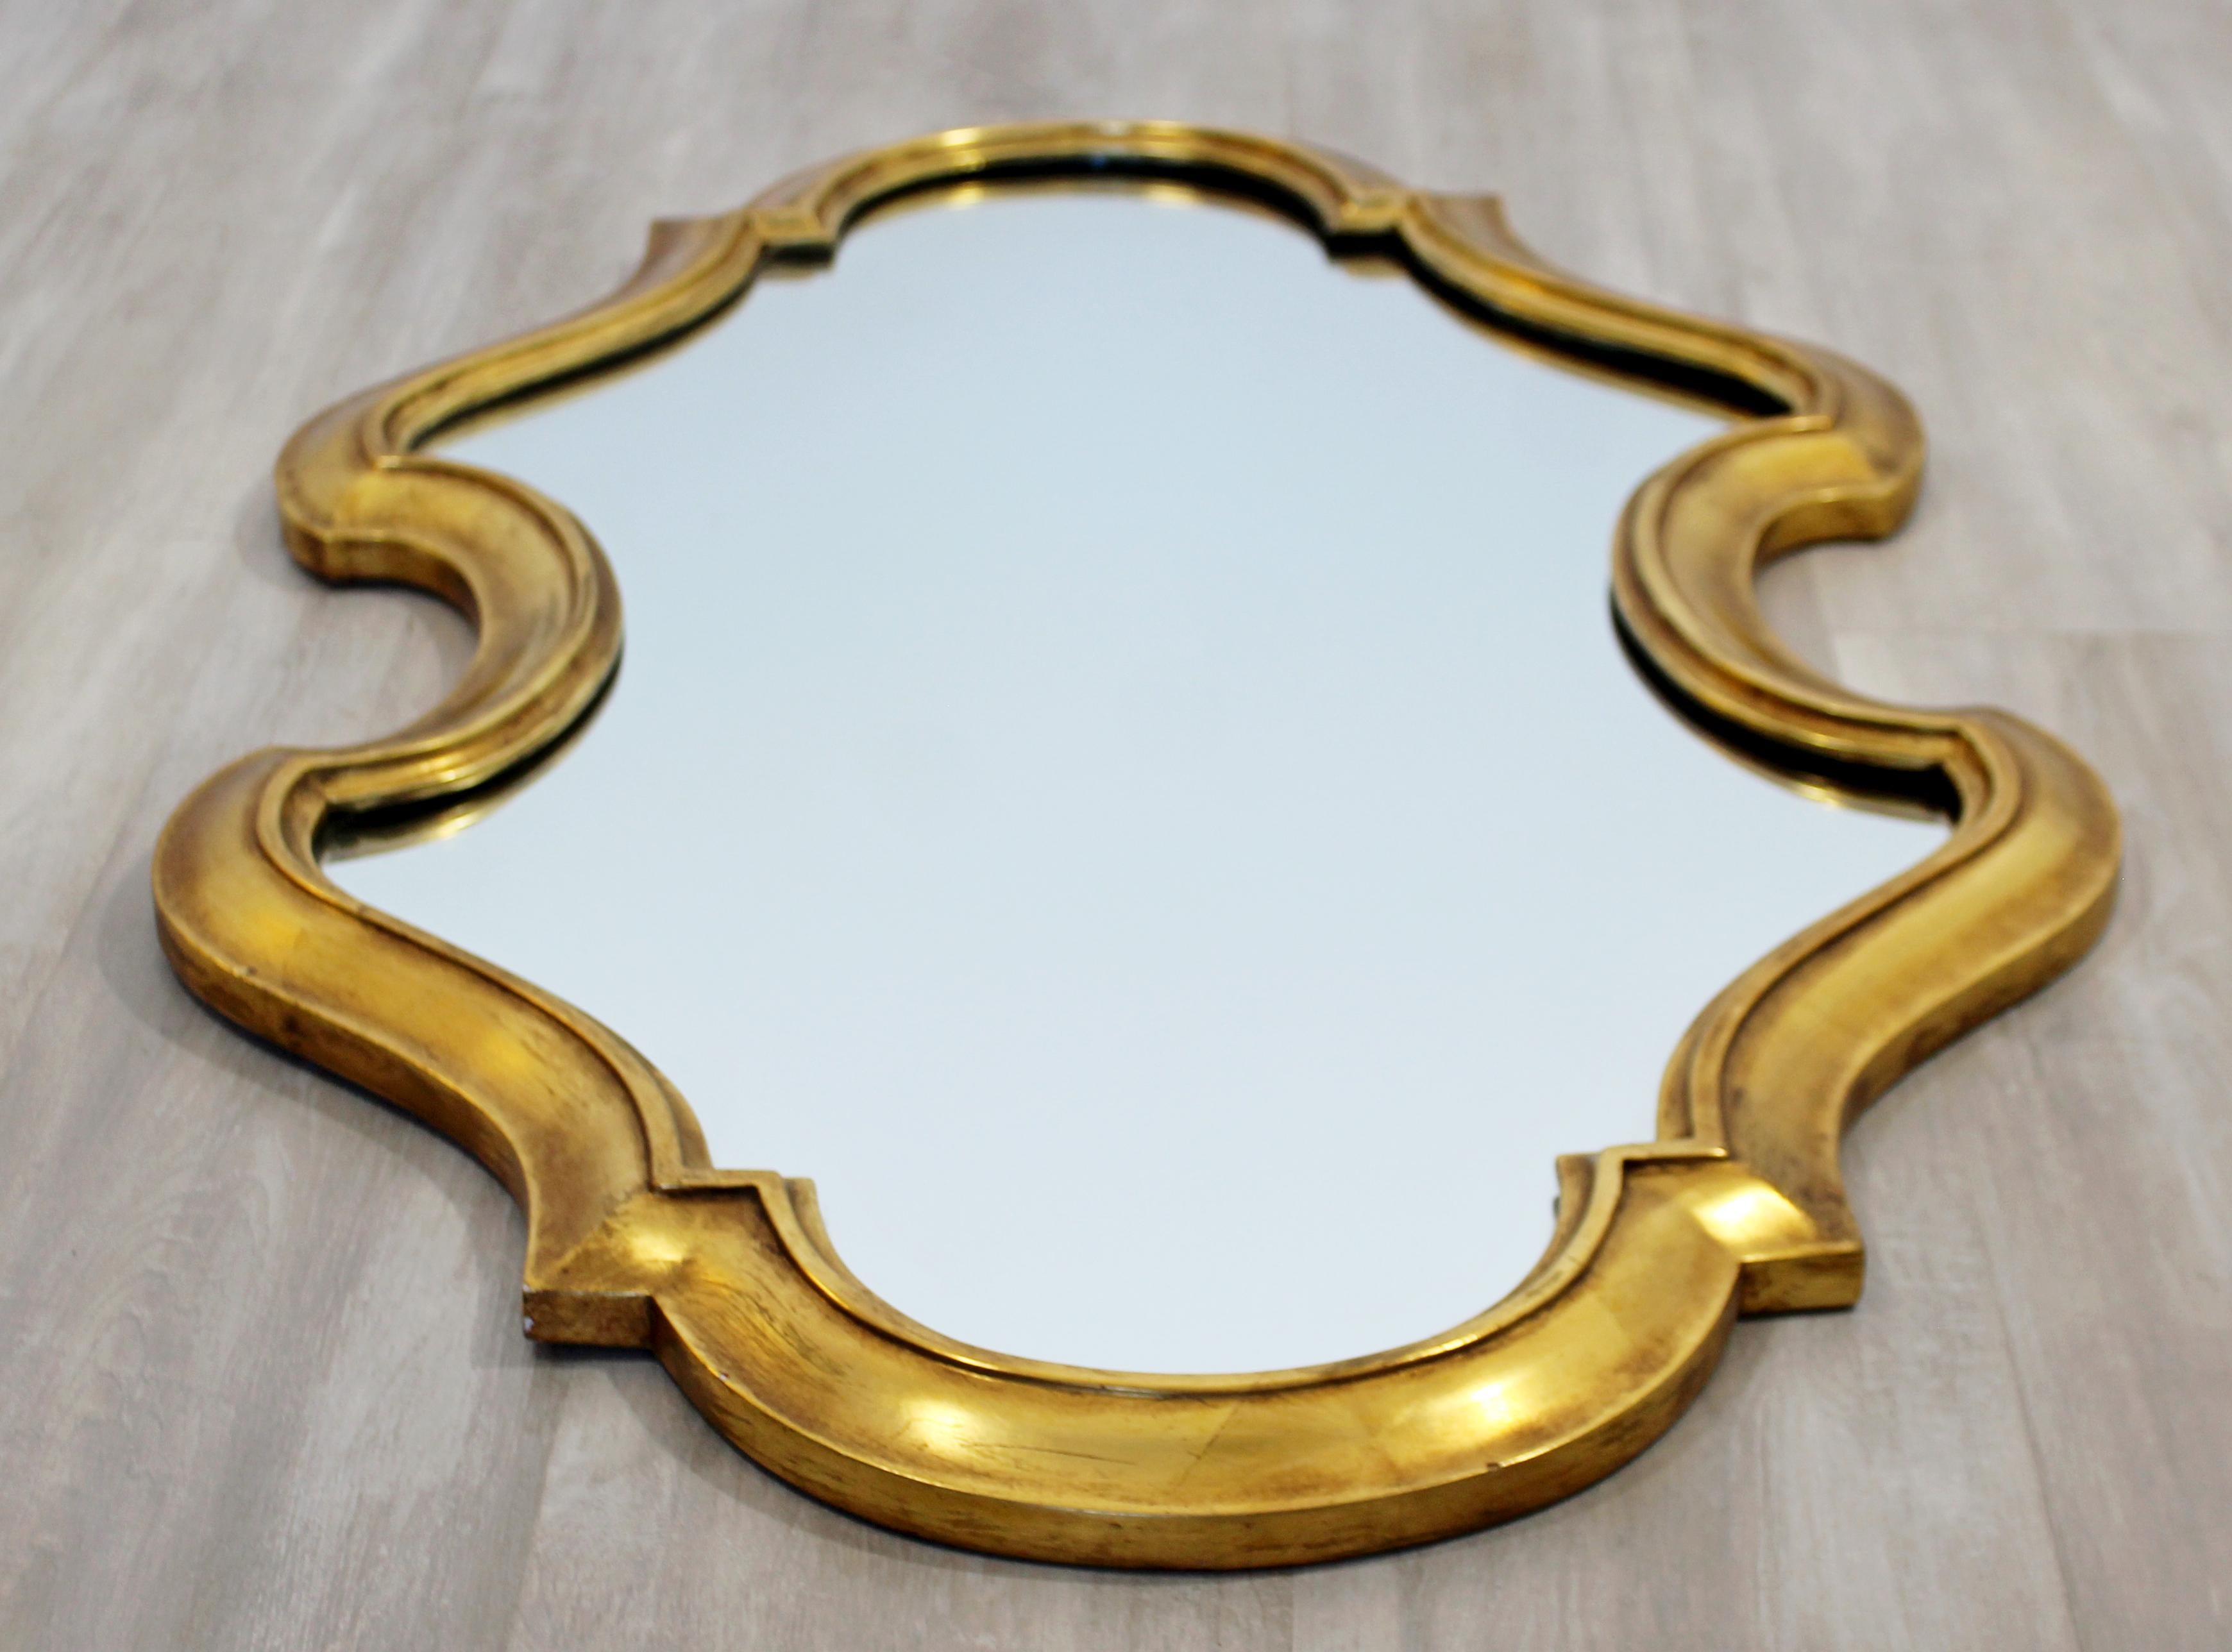 For your consideration is a gorgeous, gold gilded wood, wall mirror by La Barge, circa 1960s. In very good vintage condition. The dimensions are 24